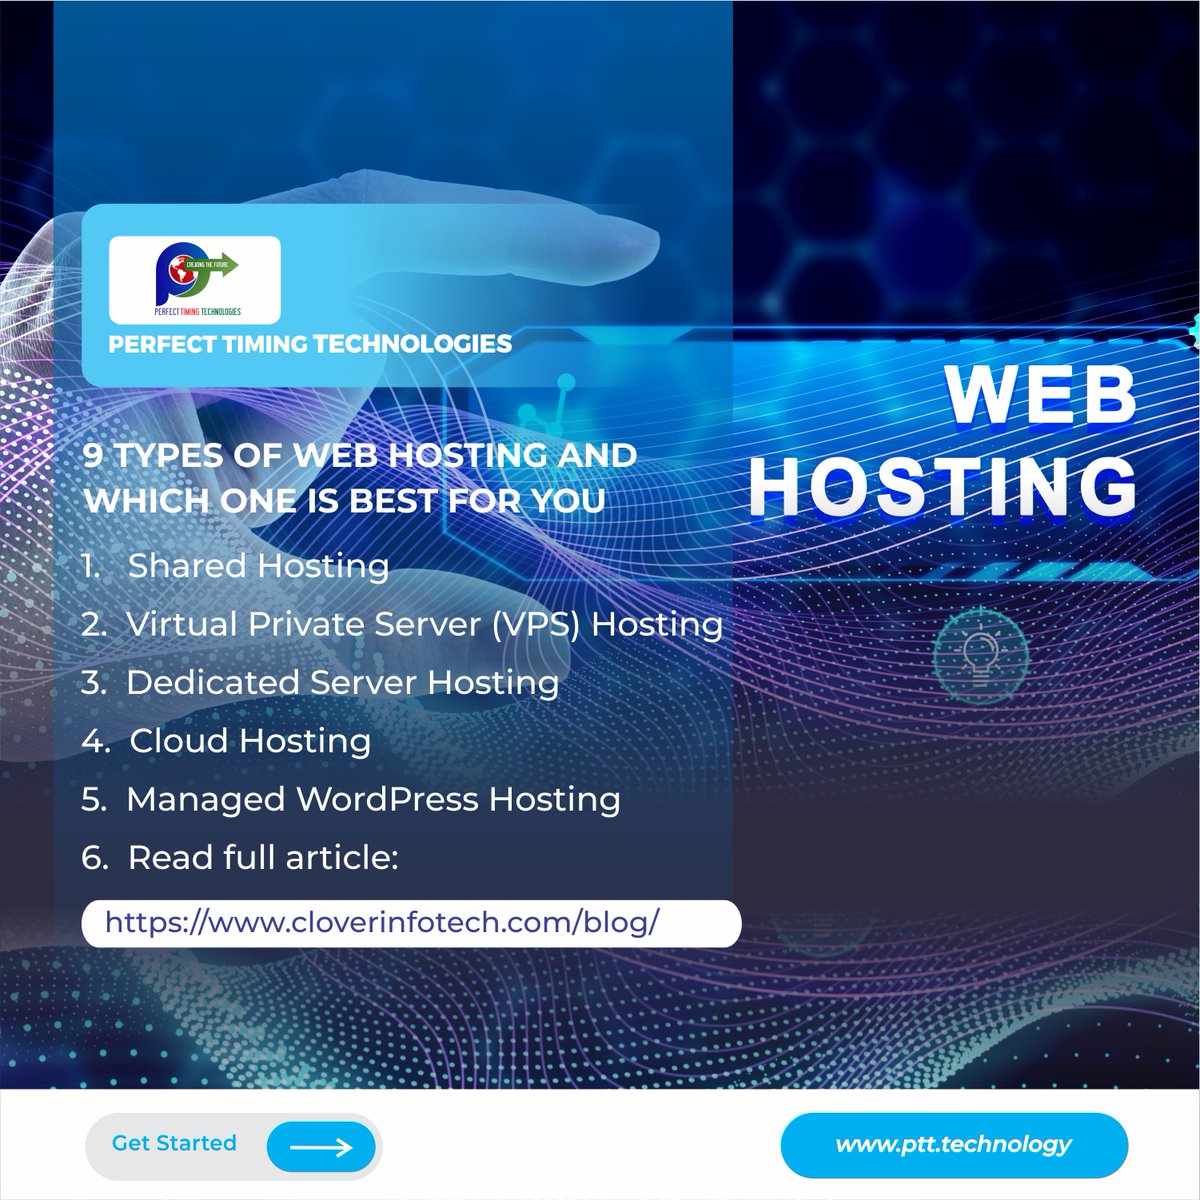 9 Types of Web Hosting and Which One Is Best for You

Read here: hostinger.in/tutorials/type… 

#WebHosting #HostingServices #WebDevelopment #TechnologyGuide #HostingOptions #SharedHosting #VPSHosting #DedicatedHosting #CloudHosting #PerfectTimingTechnologies #PerfectTimingHolding